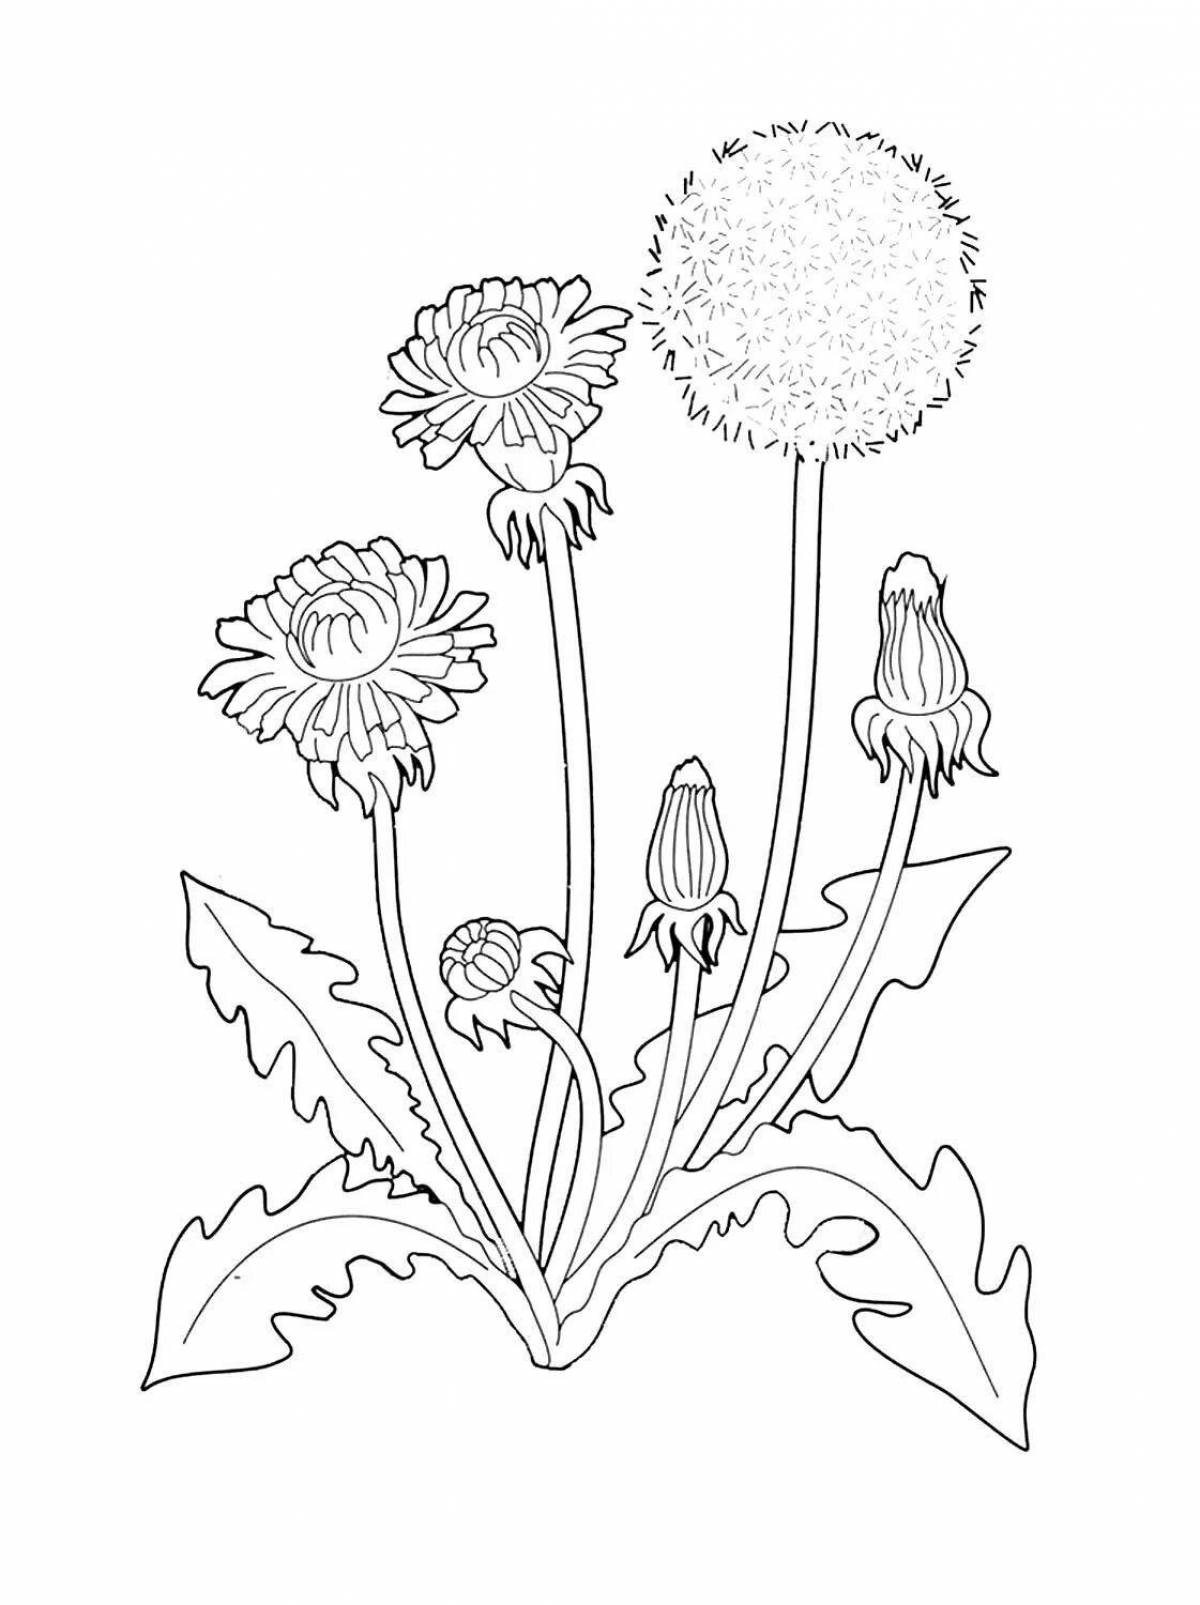 Coloring wild flowers for kids